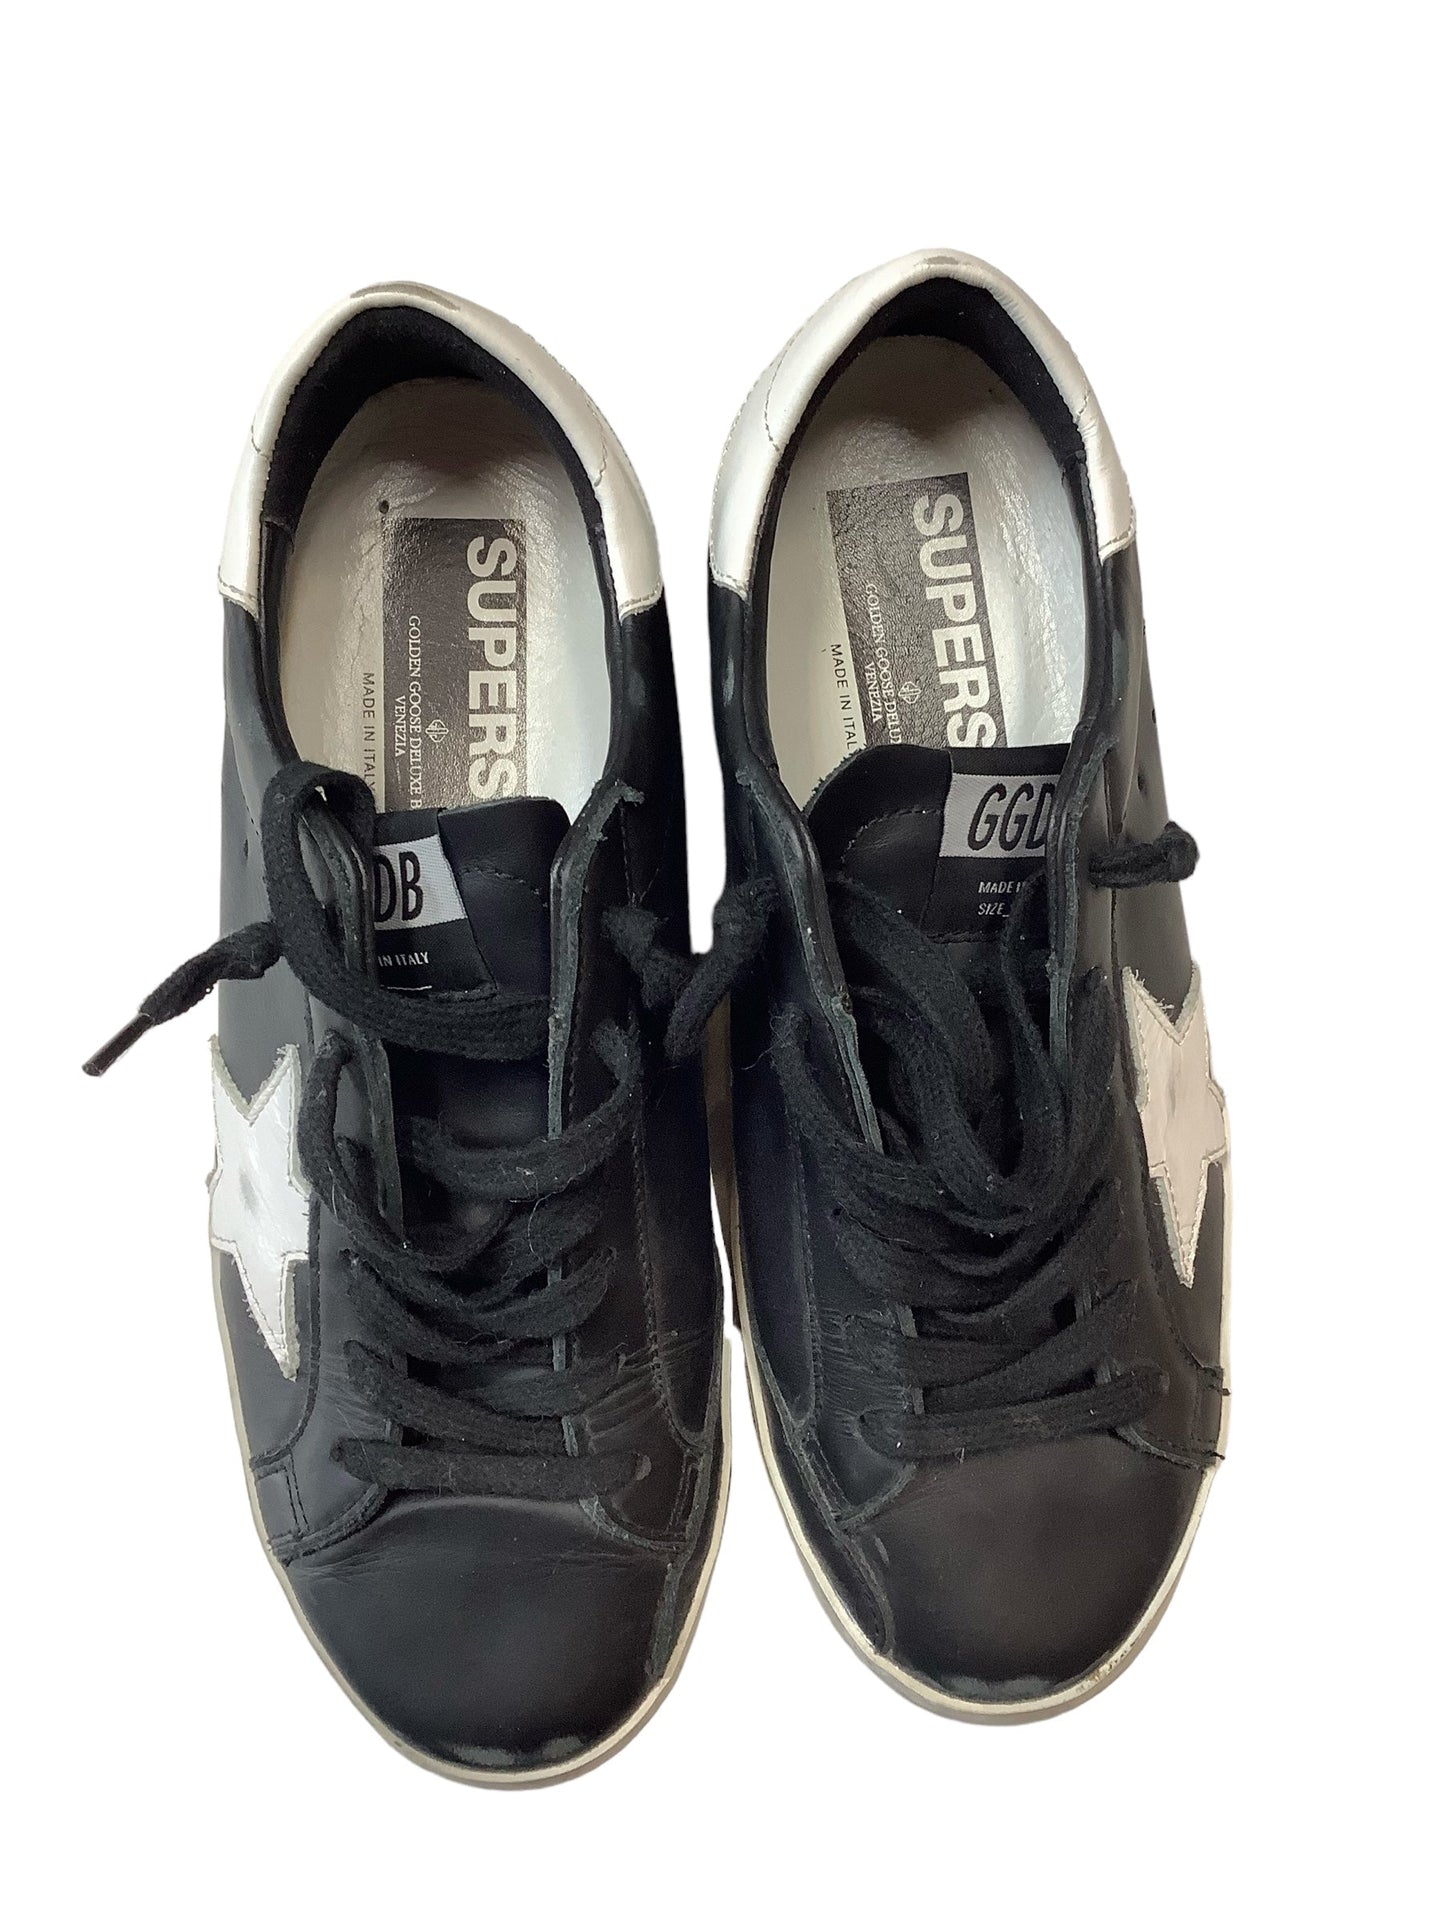 Shoes Athletic By Golden Goose  Size: 7.5/38